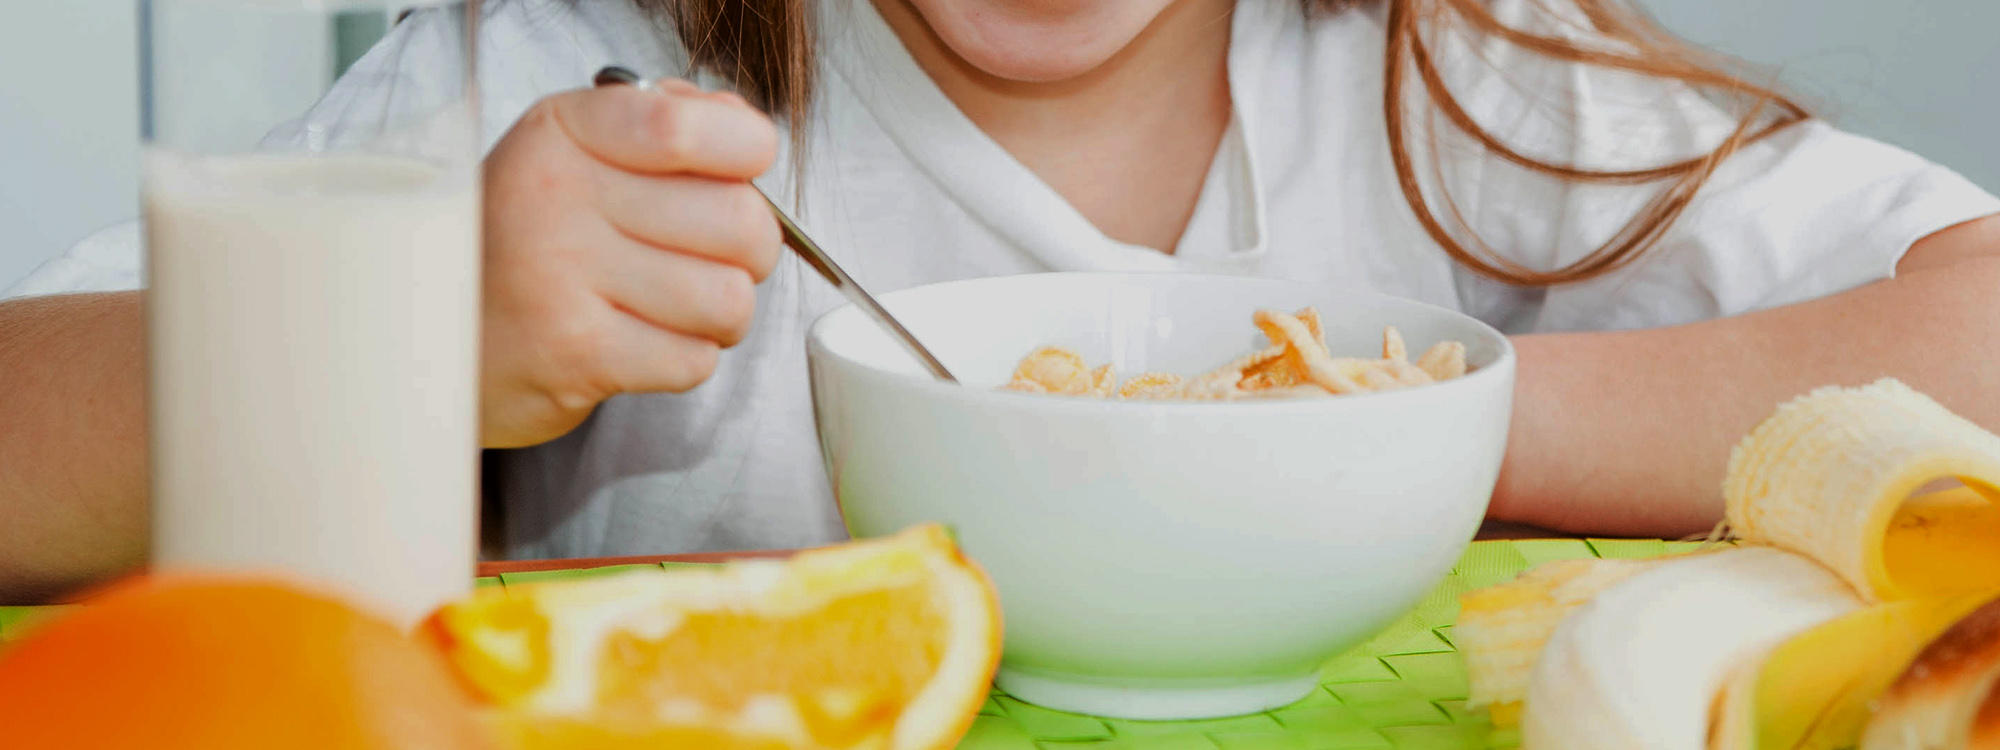 Do Kids Who Eat Breakfast Perform Better Academically? | U.S. Dairy